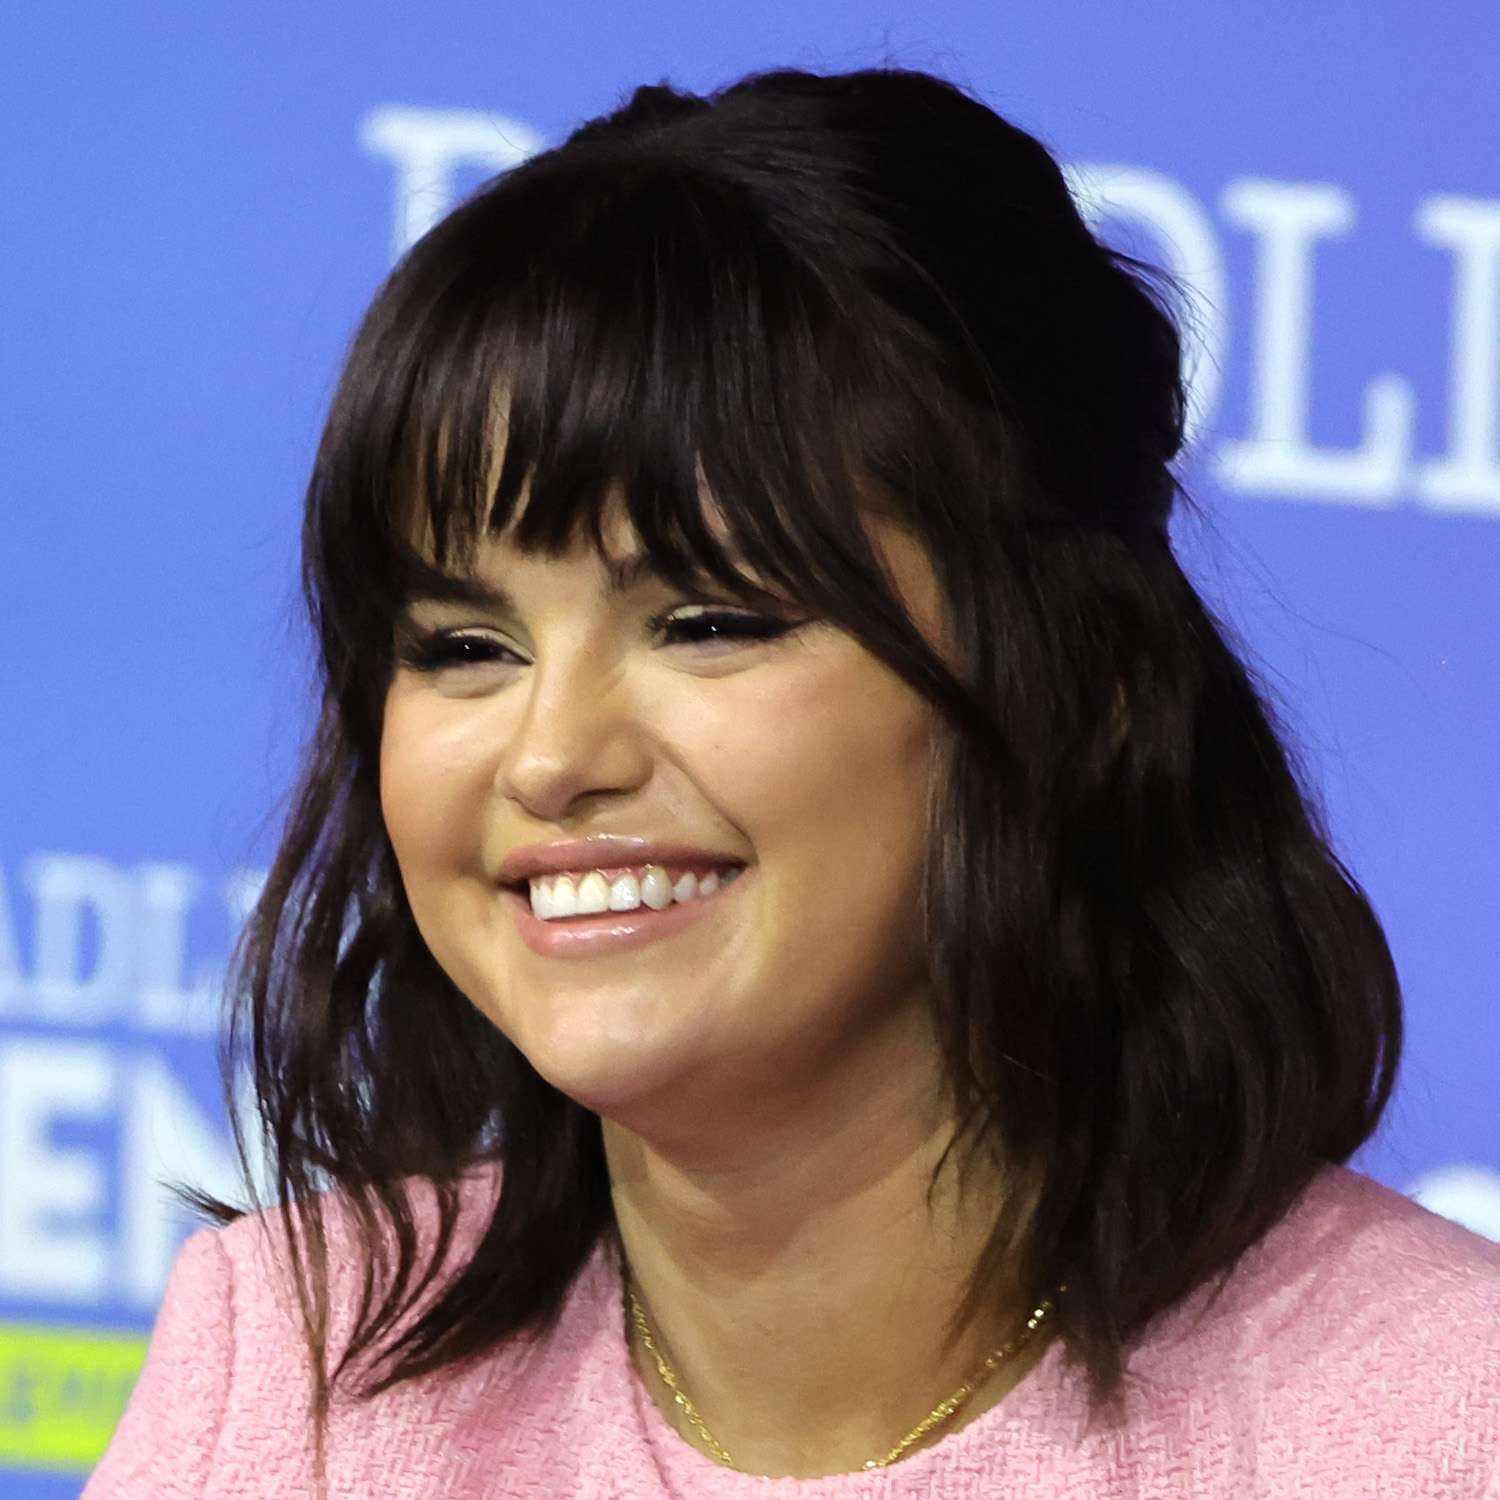 Selena Gomez wears a half-up bob hairstyle with bangs and face-framing layers